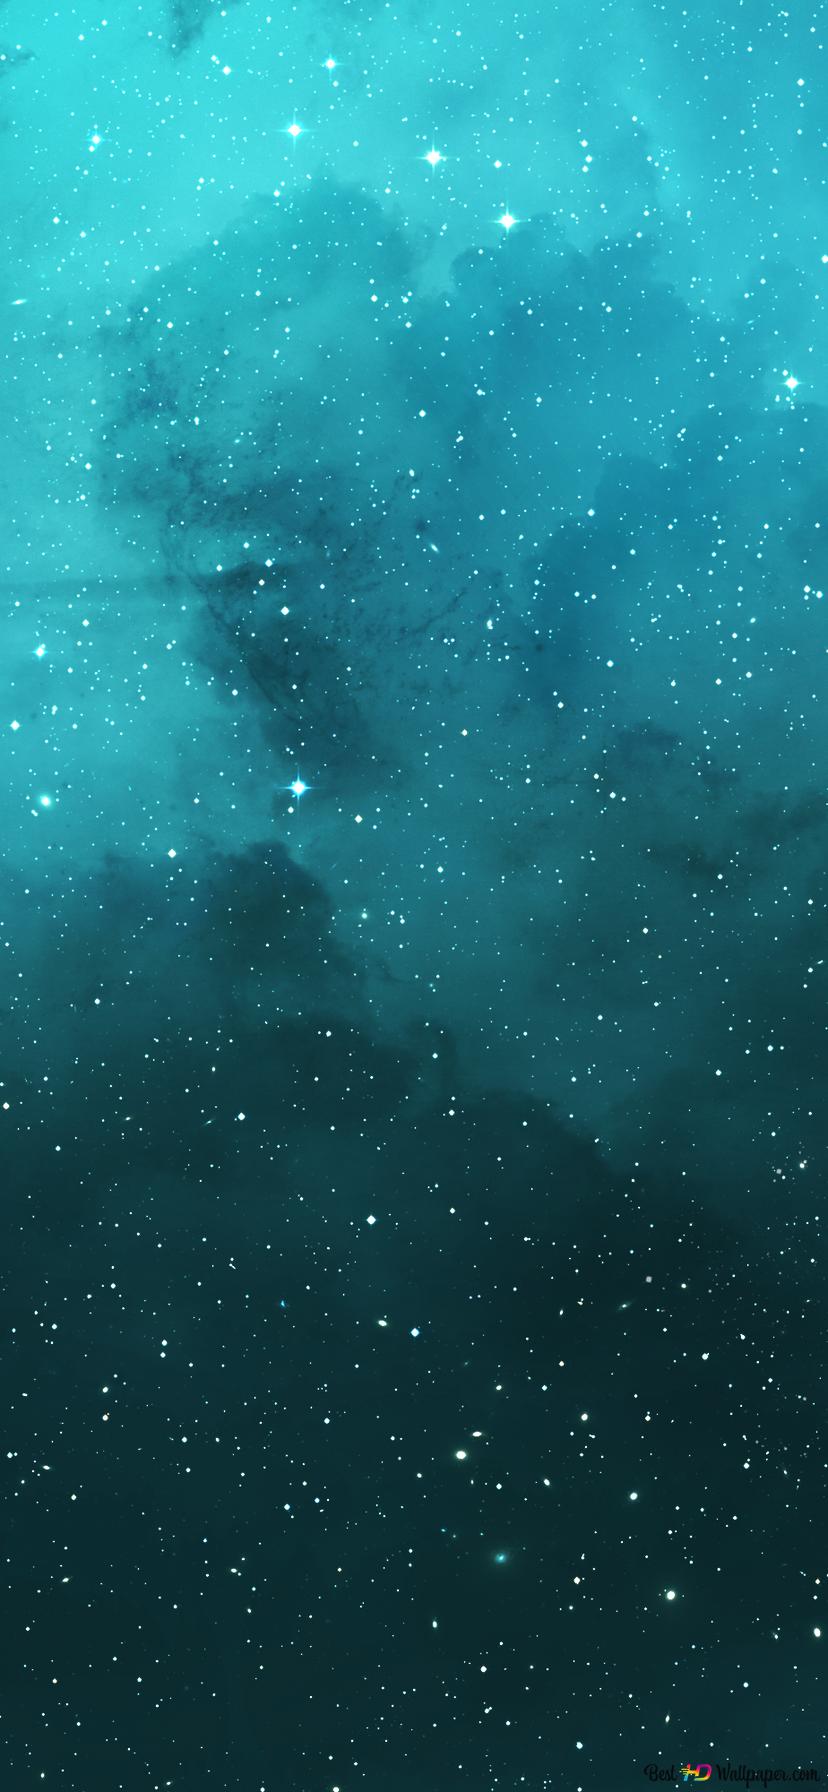 Space turquoise universe 2K wallpaper download